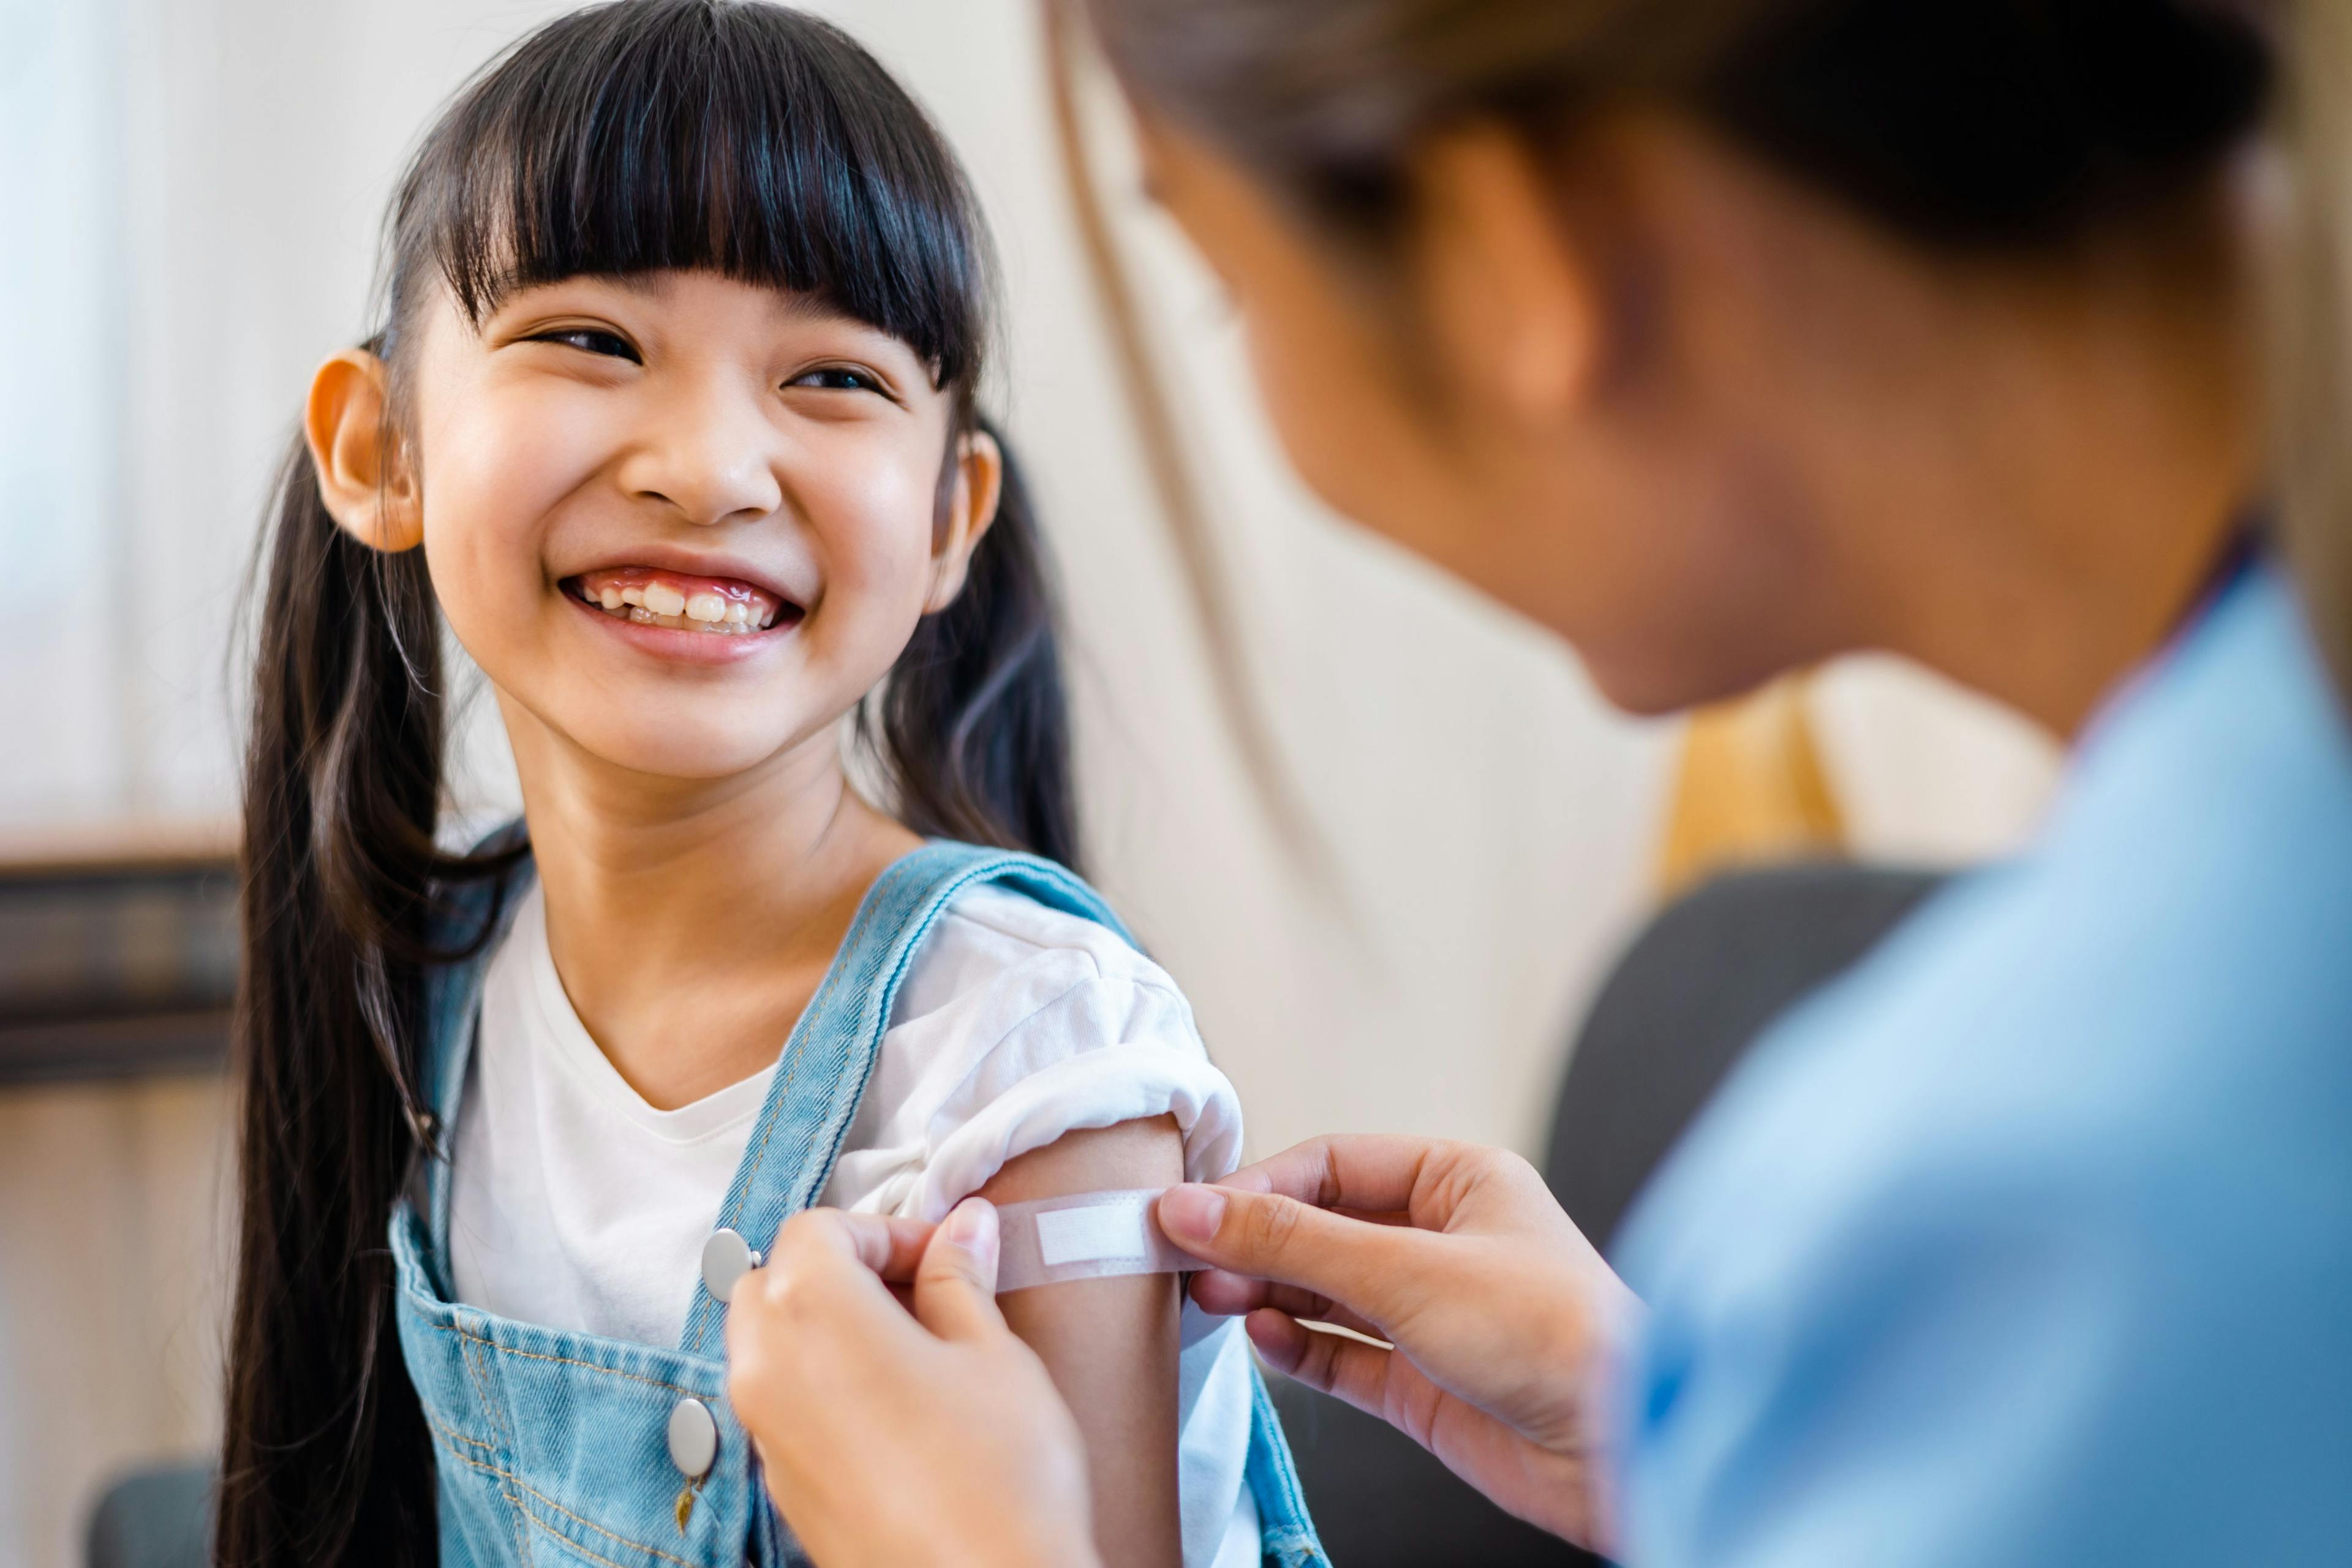 Kindergarten vaccinations fall, serve as reminder to offer catch-up vaccine schedules